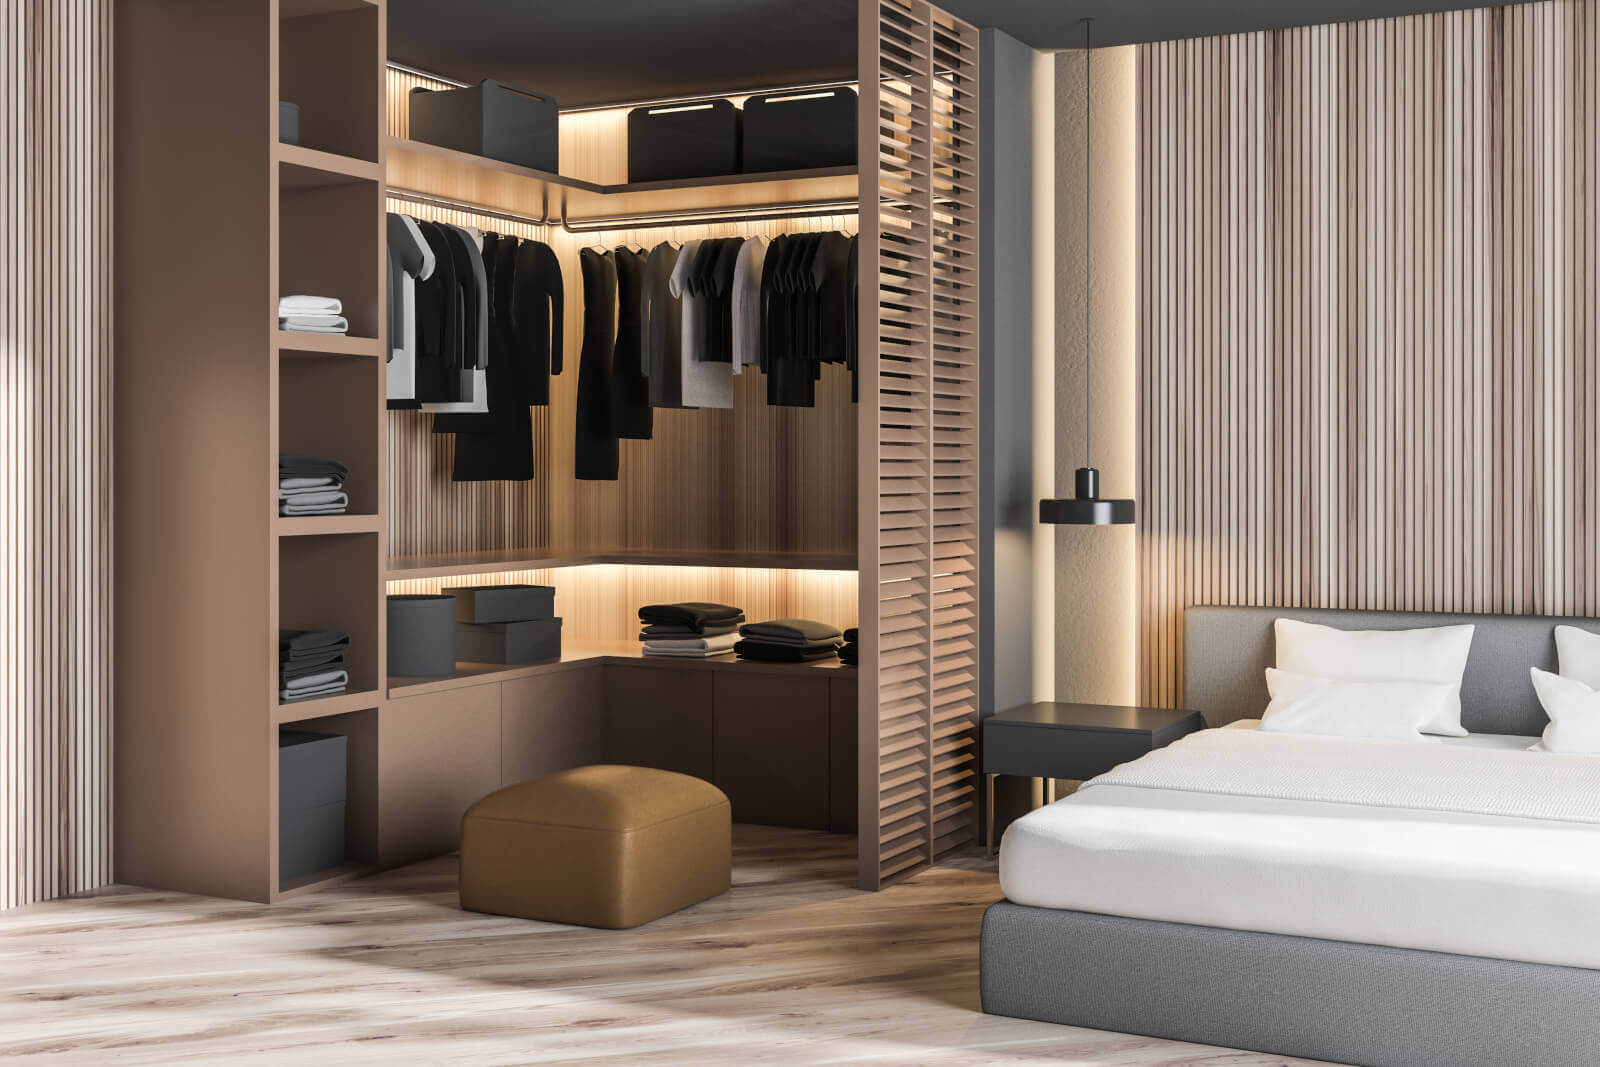 Five ways to update your bedroom wardrobe Interior Design, Design News and Architecture Trends